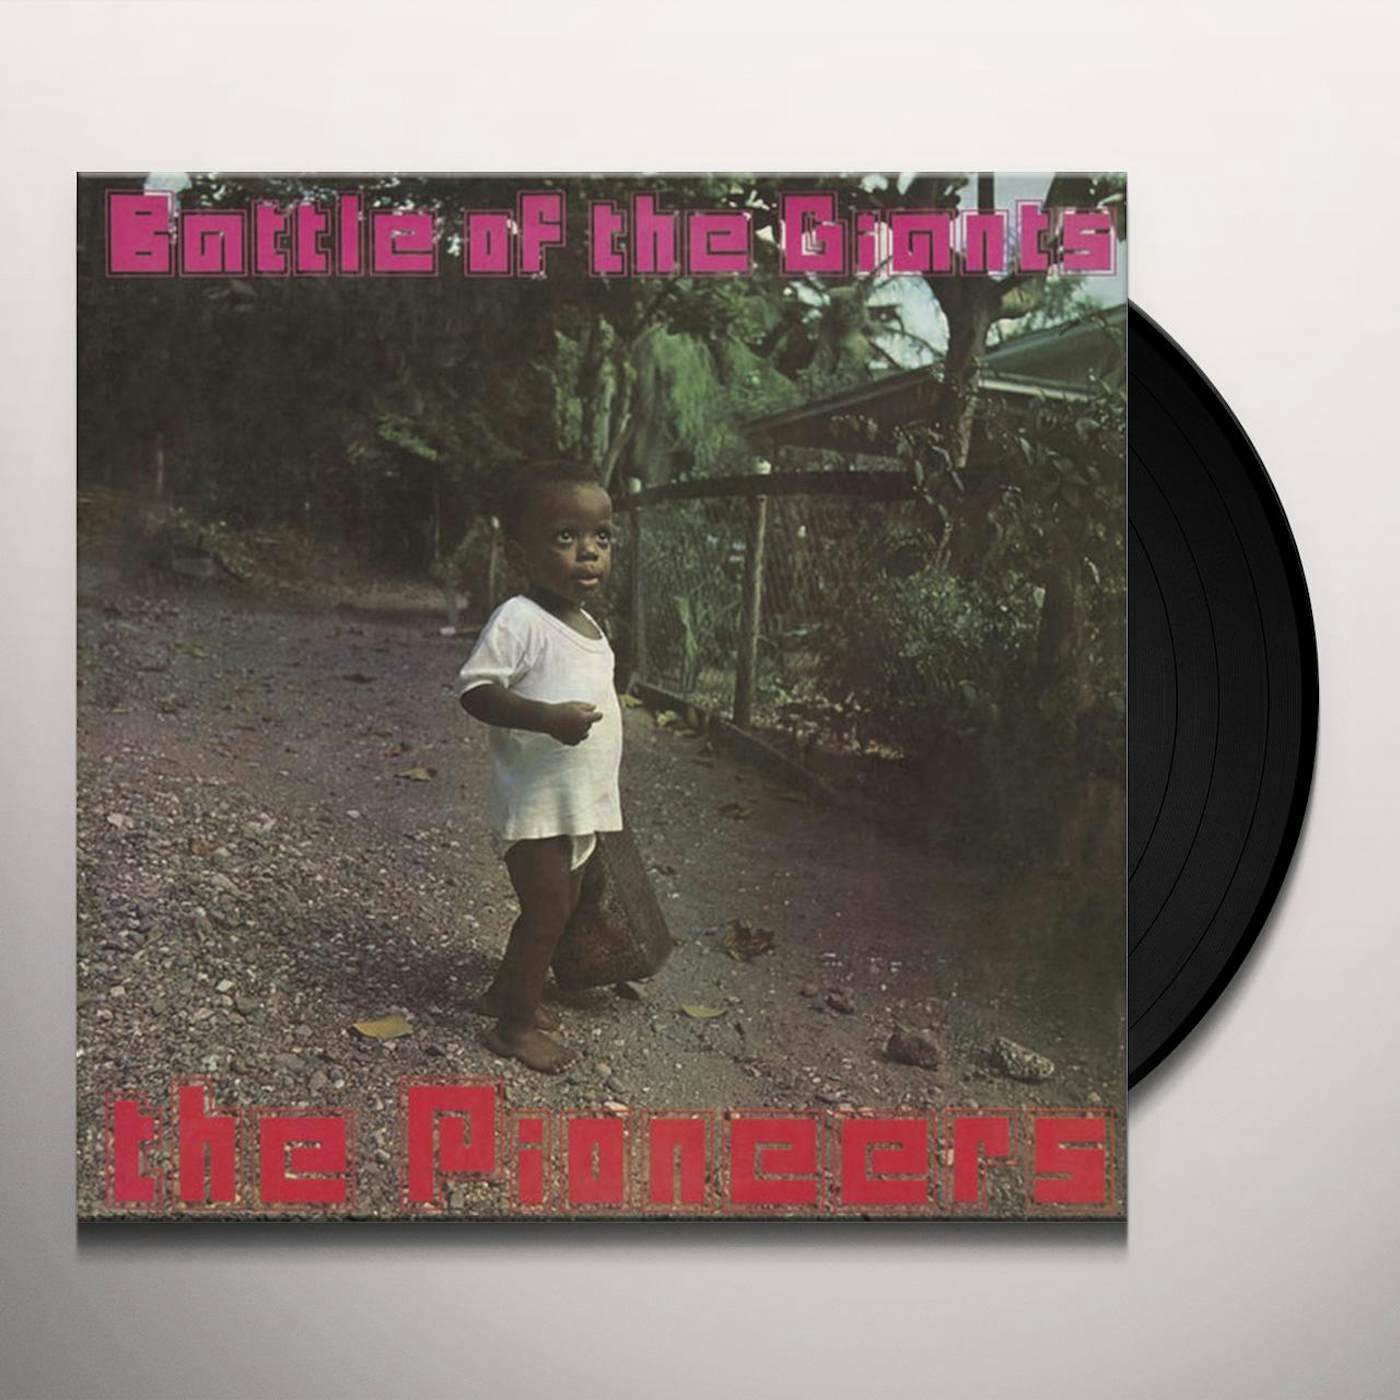 The Pioneers Battle of the Giants Vinyl Record